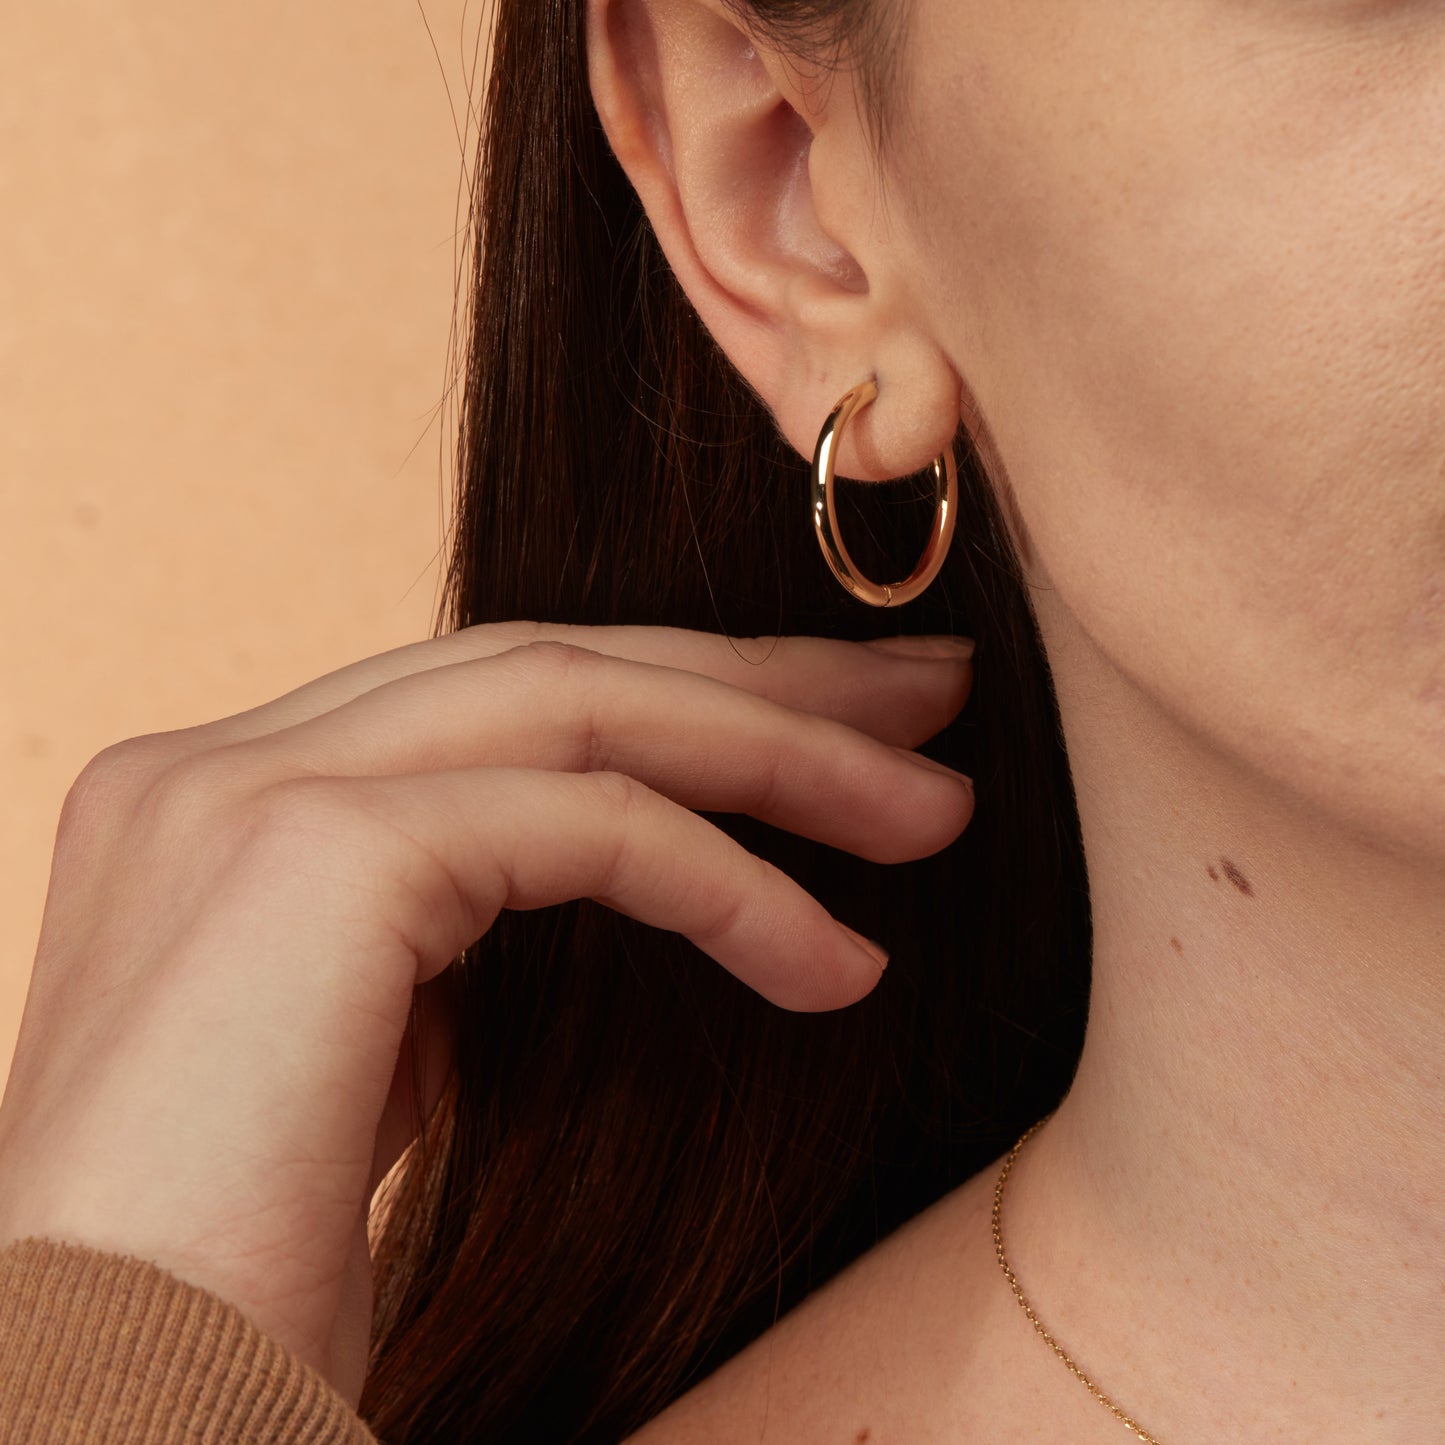 large hoop earrings, polished gold hoops, polished earrings, classic gold hoops, real gold hoops, solid gold hoops, solid gold earrings, gold earrings women, yellow rose white, gold polished hoops, 14k gold earrings, medium hoop earrings, solid gold huggies, 